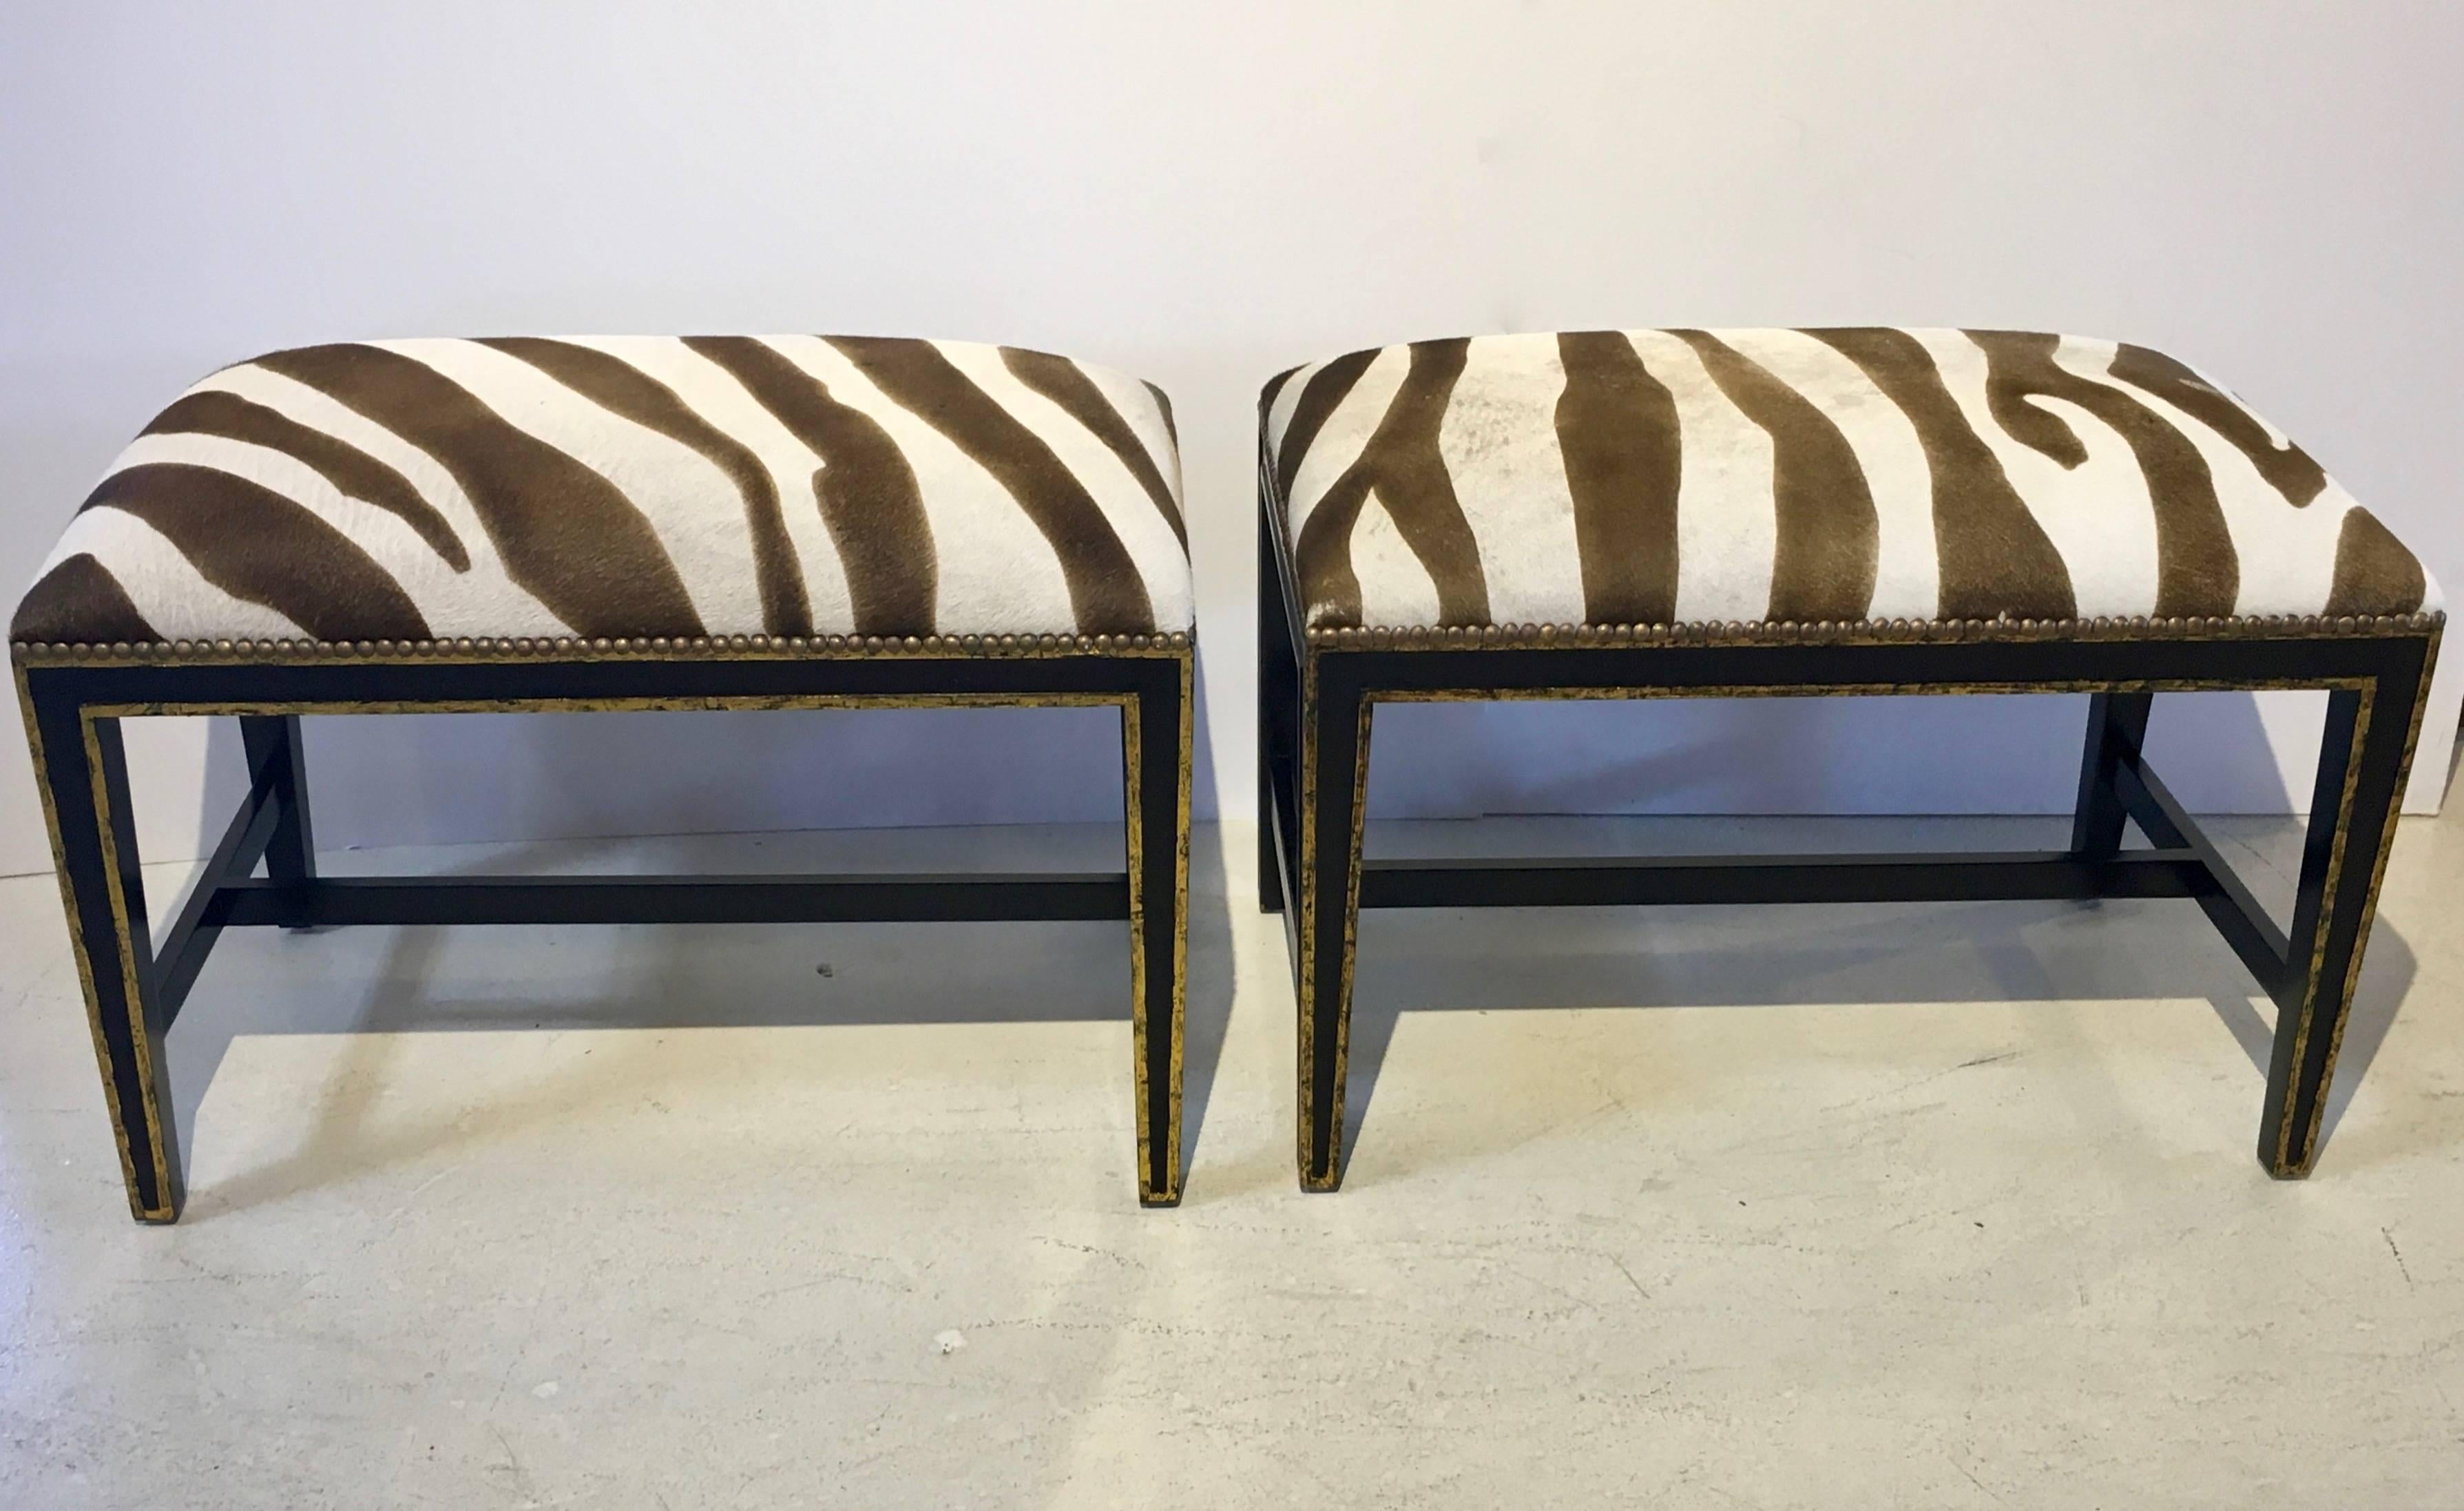 Zebra Printed Hide Pair of Ottomans or Benches, with Brass Nailhead Detailing 1